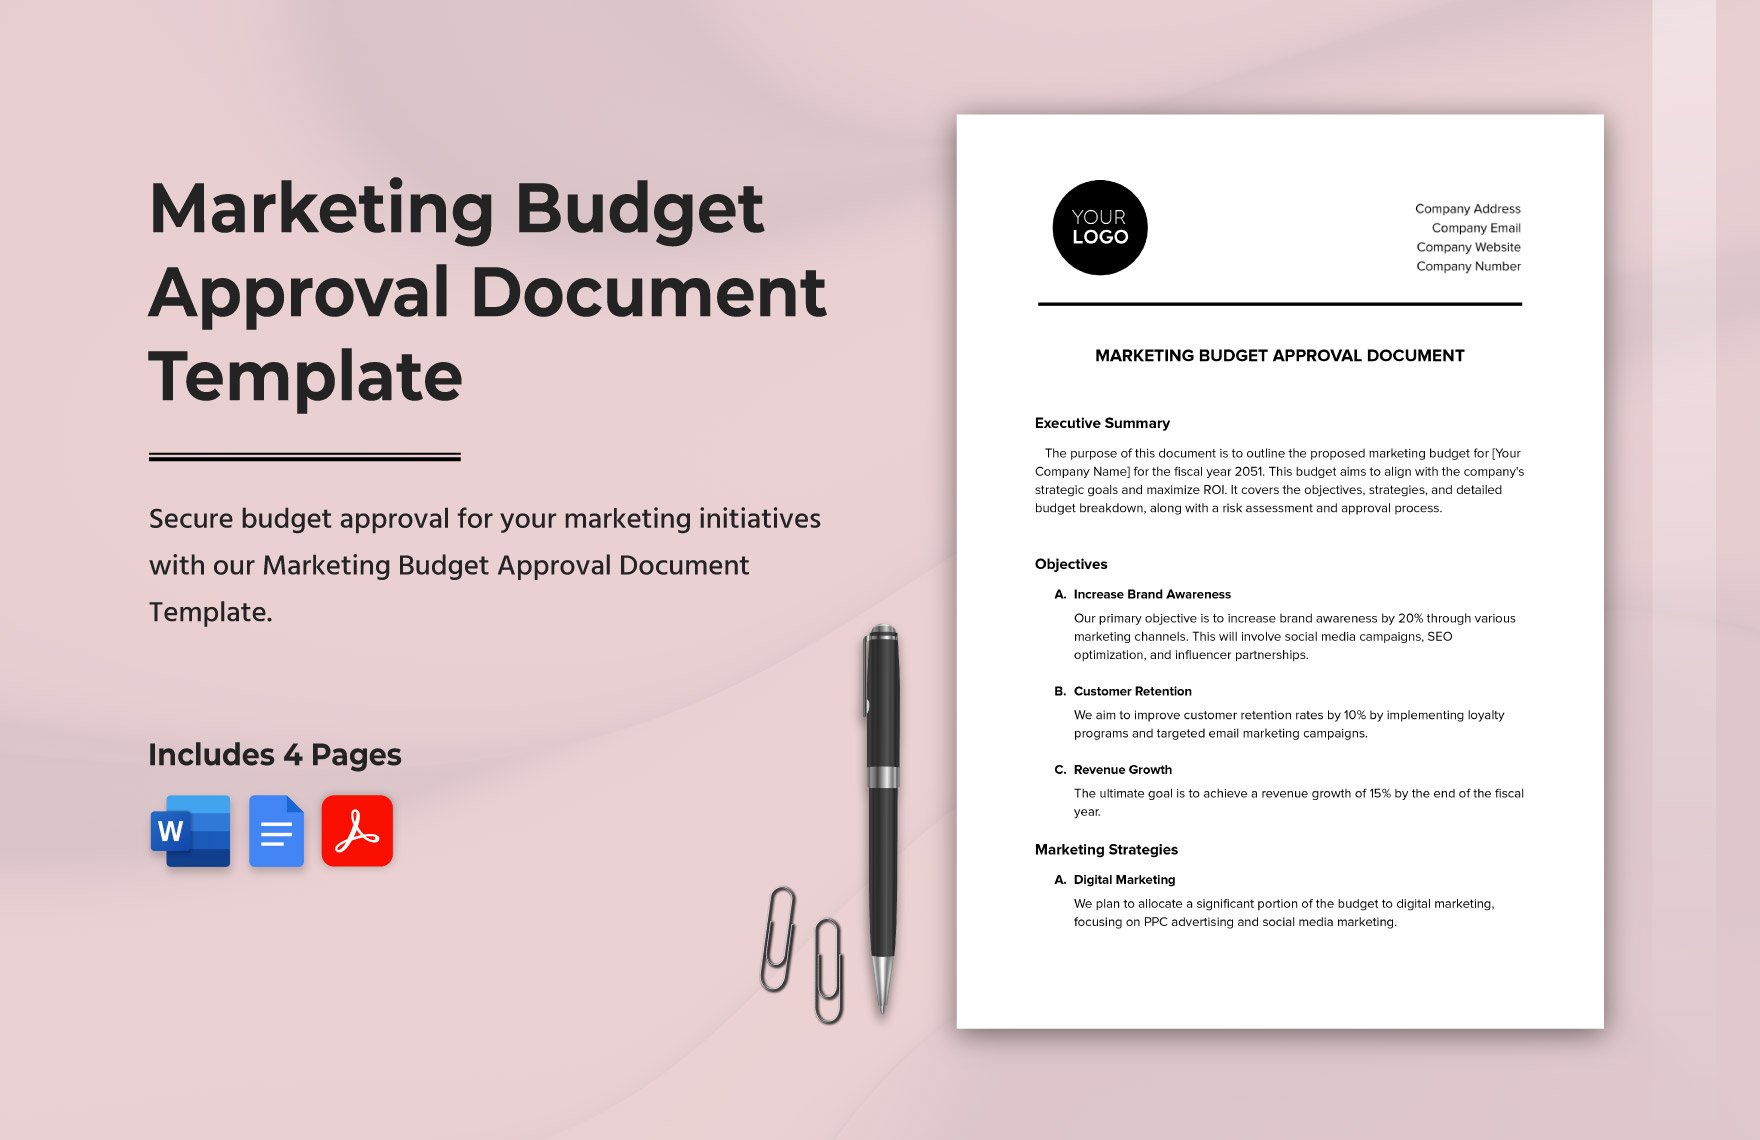 Marketing Budget Approval Document Template in Word, Google Docs, PDF